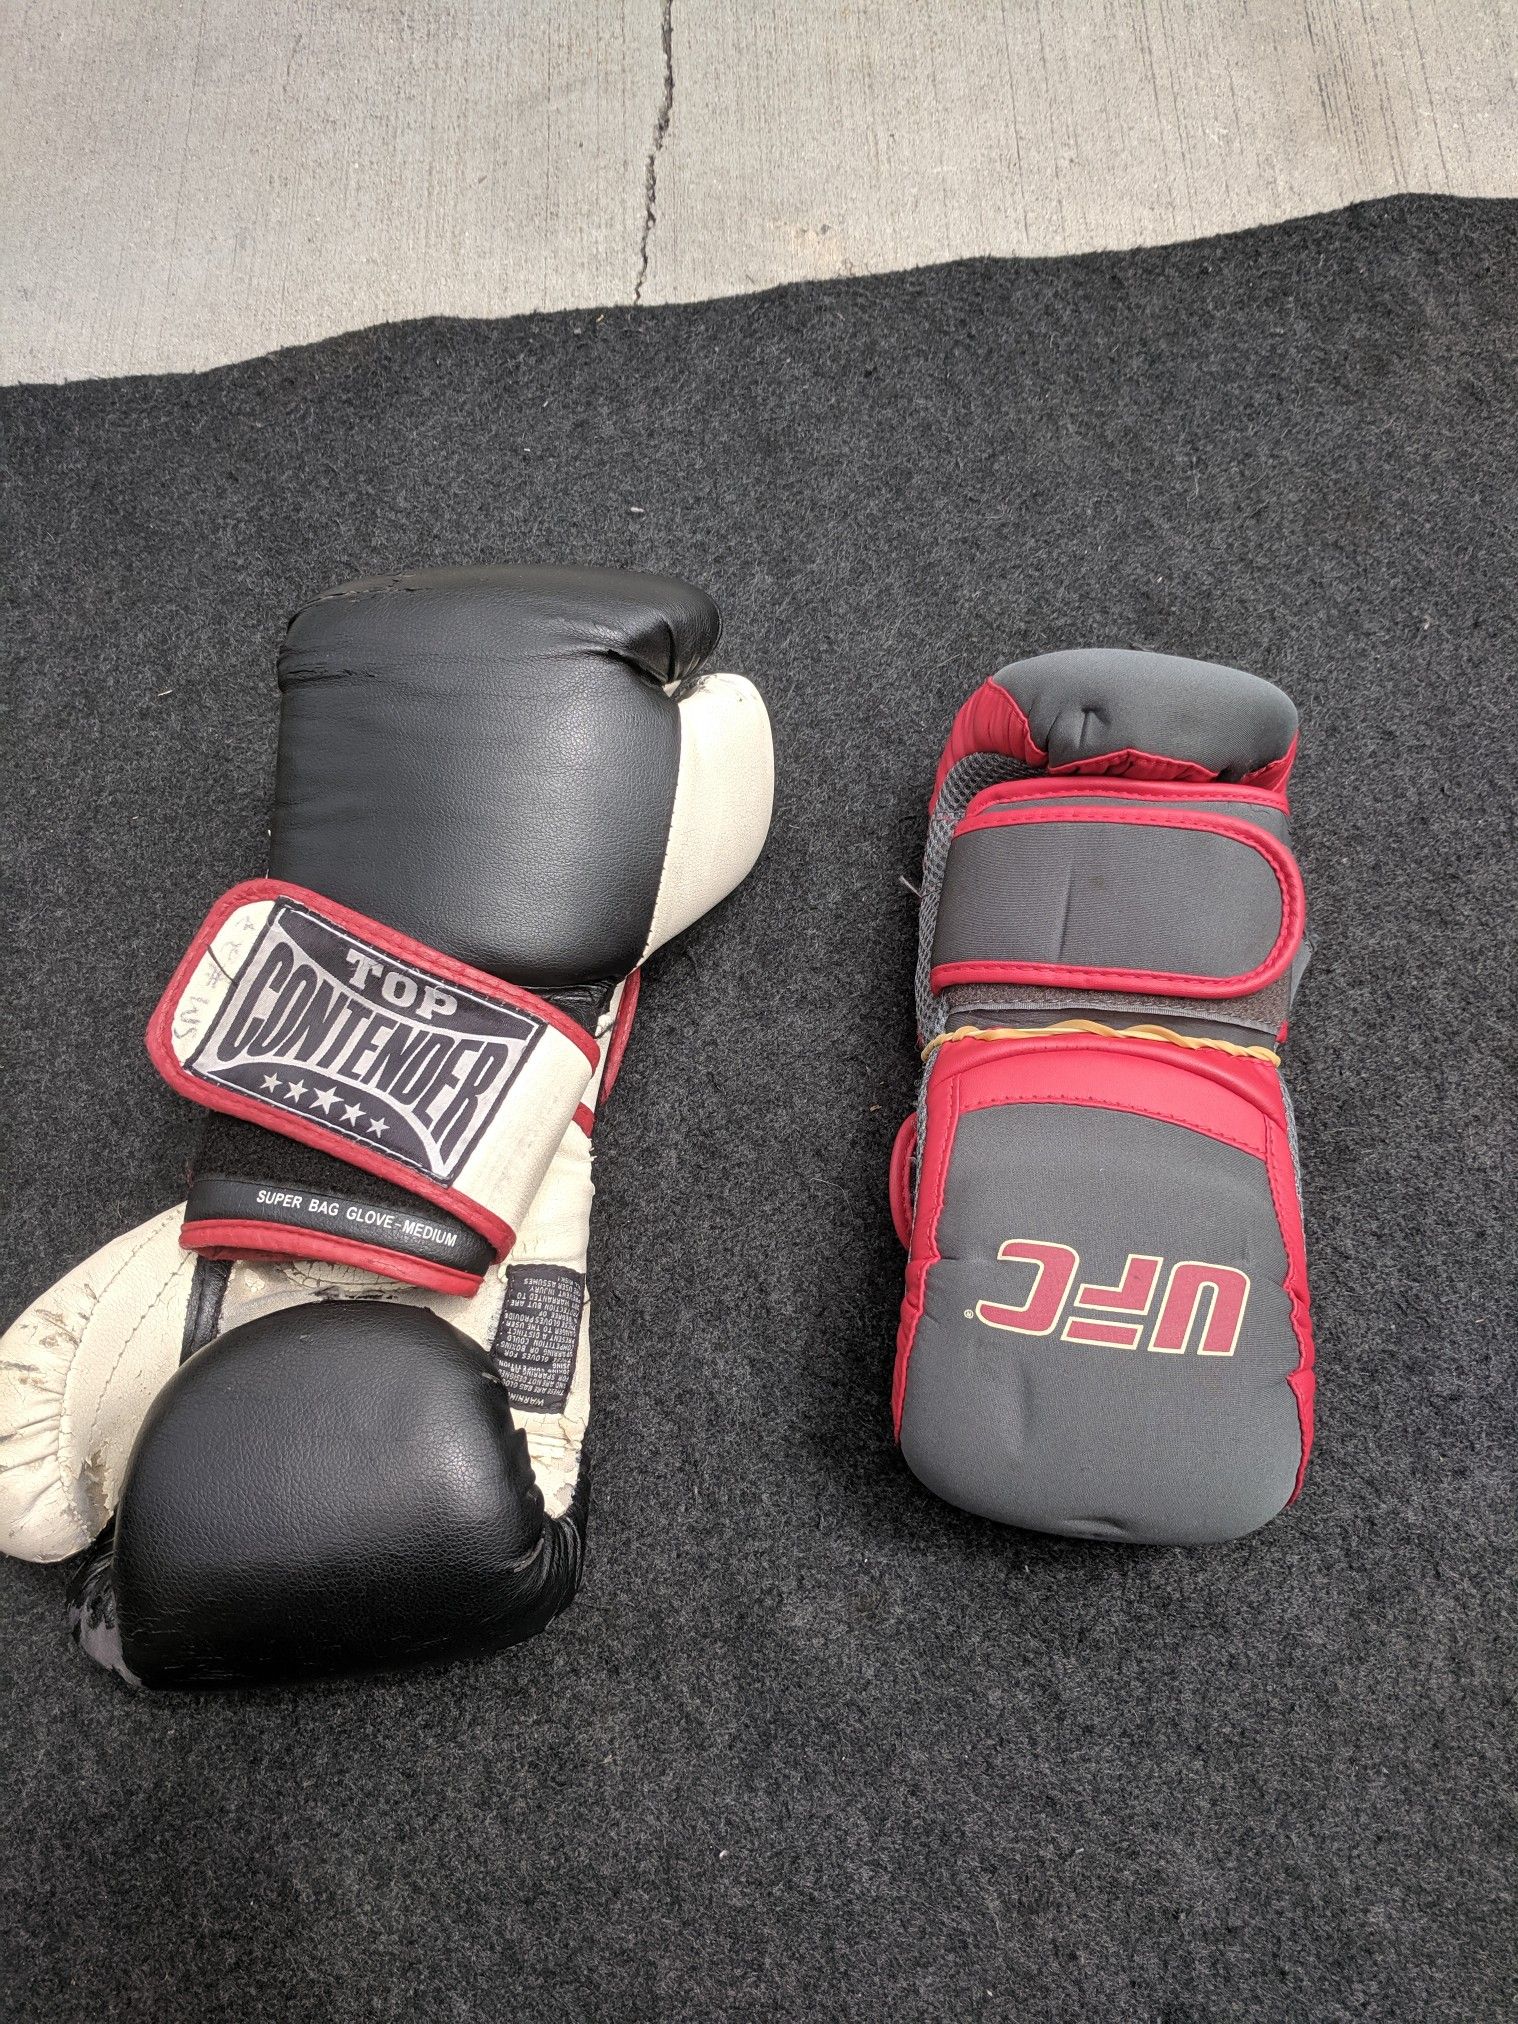 UFC Gloves in great condition